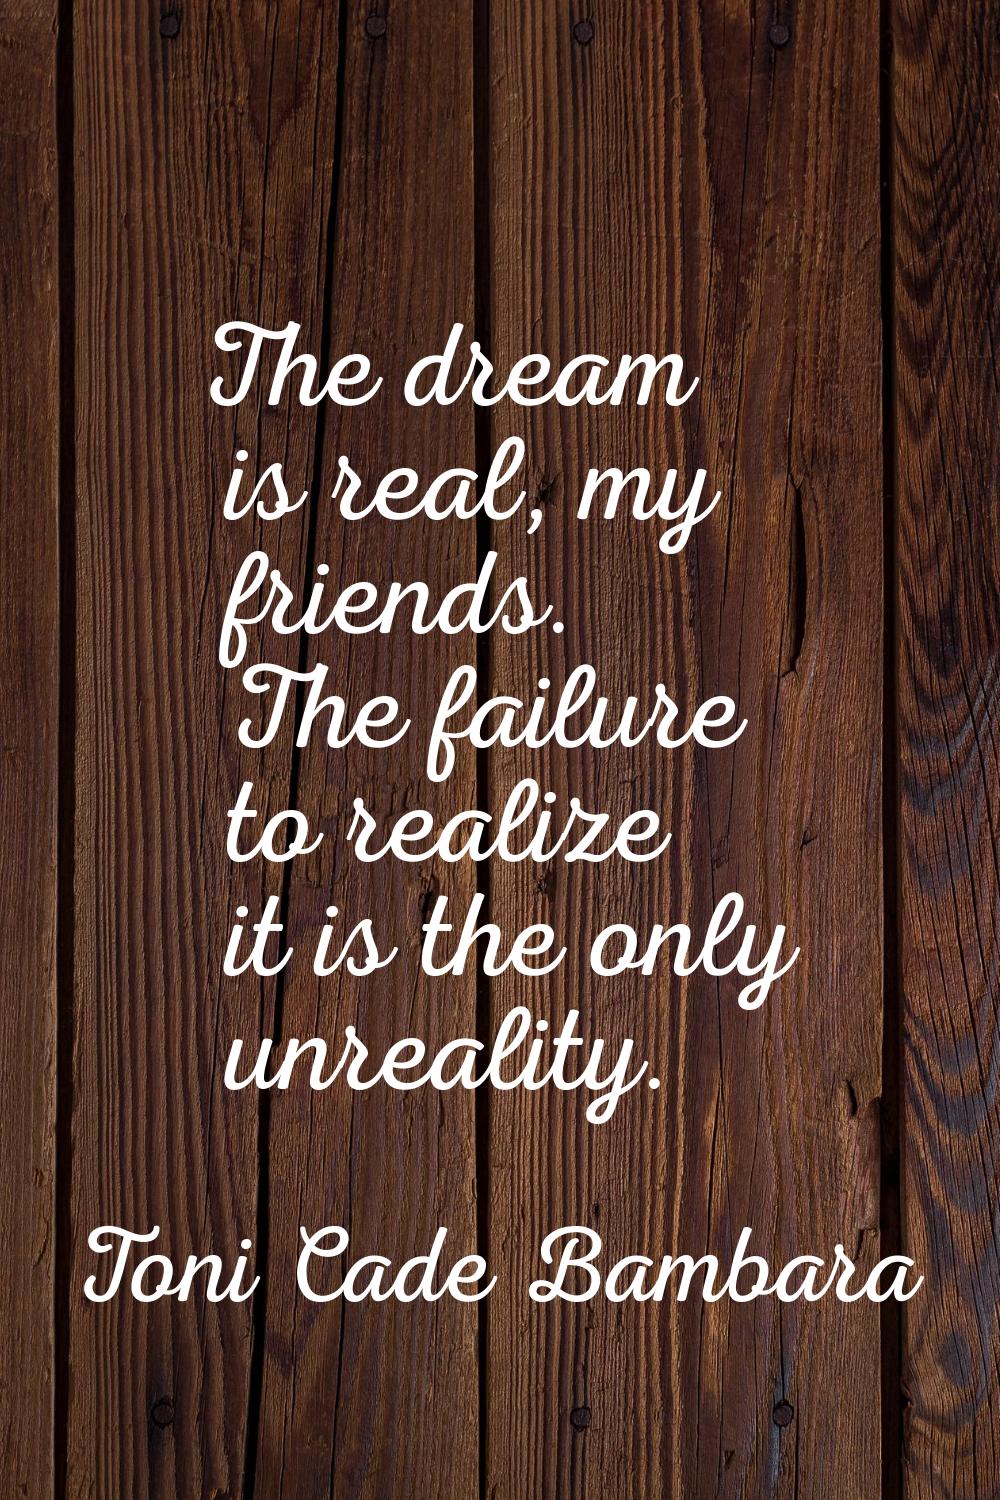 The dream is real, my friends. The failure to realize it is the only unreality.